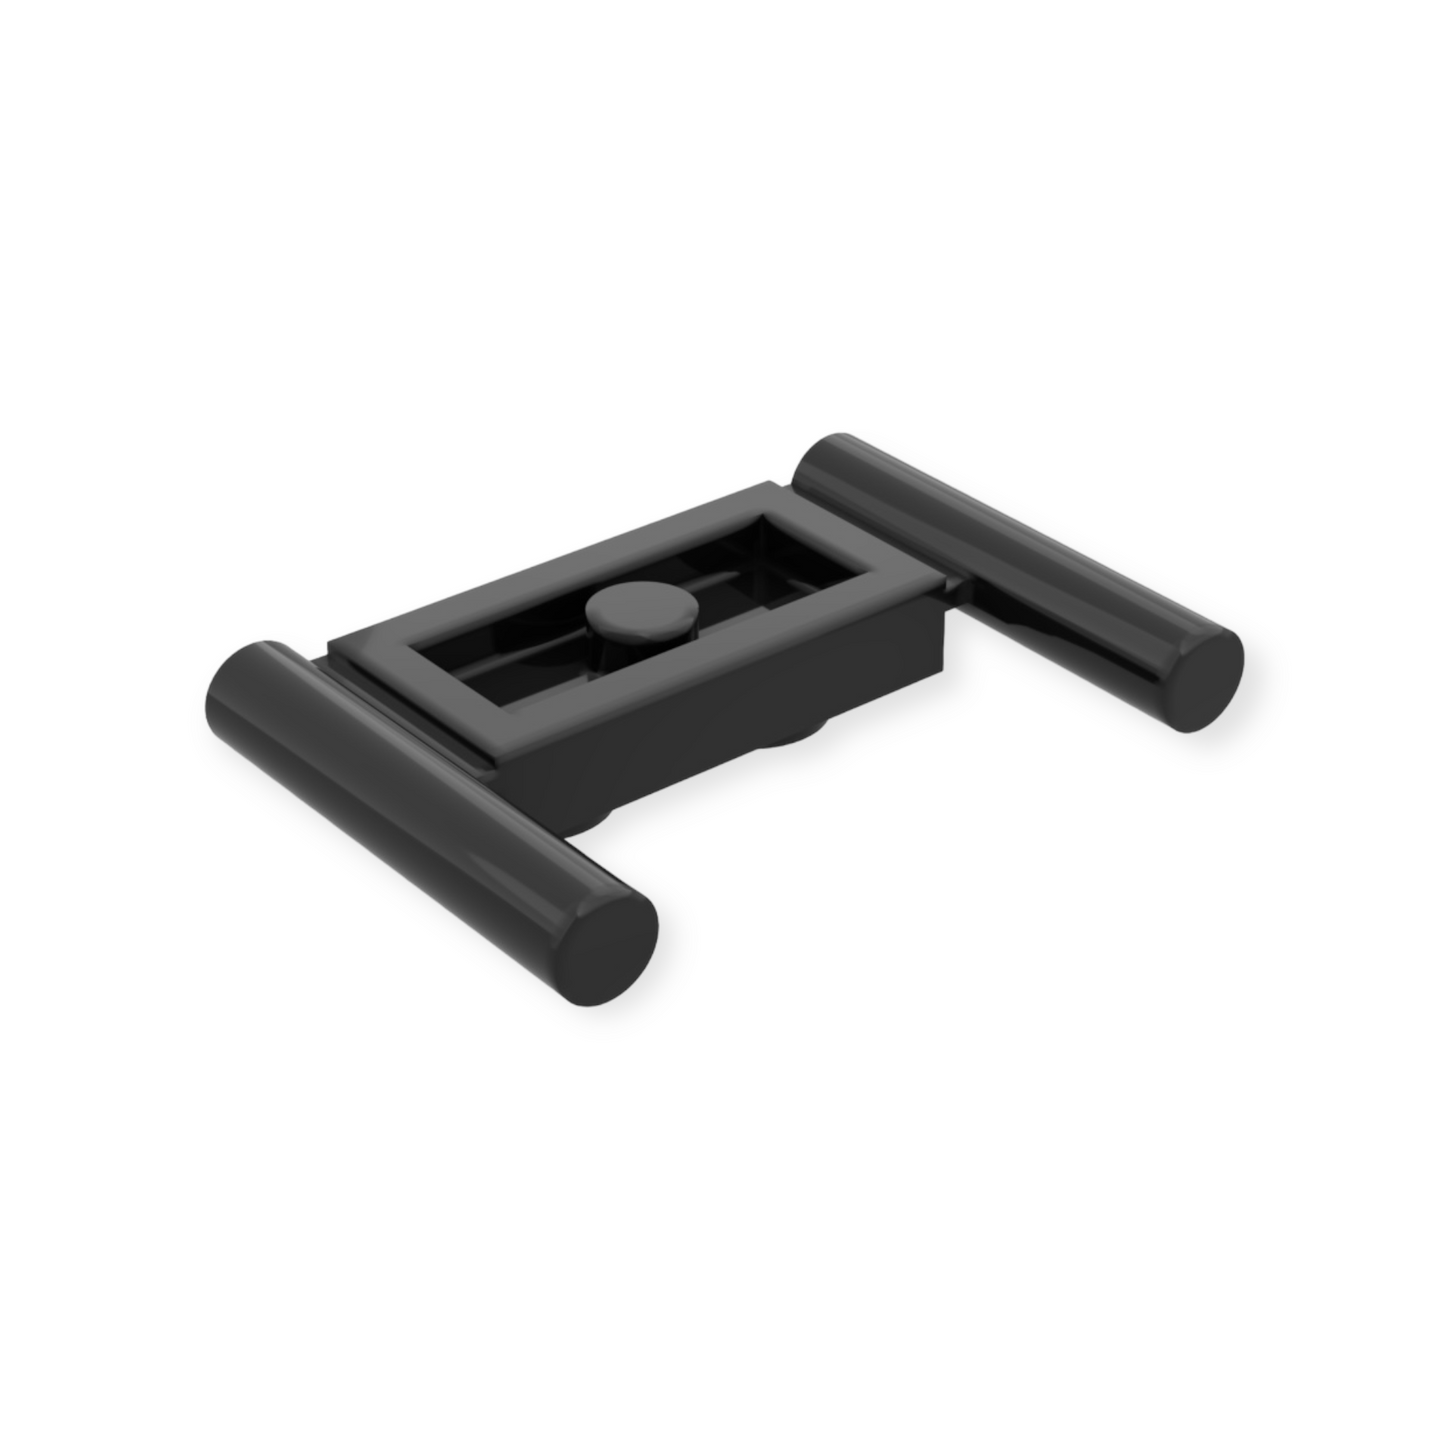 LEGO Plate Modified 1x2 with Bar Handles - Flat Ends Low Attachment - Black